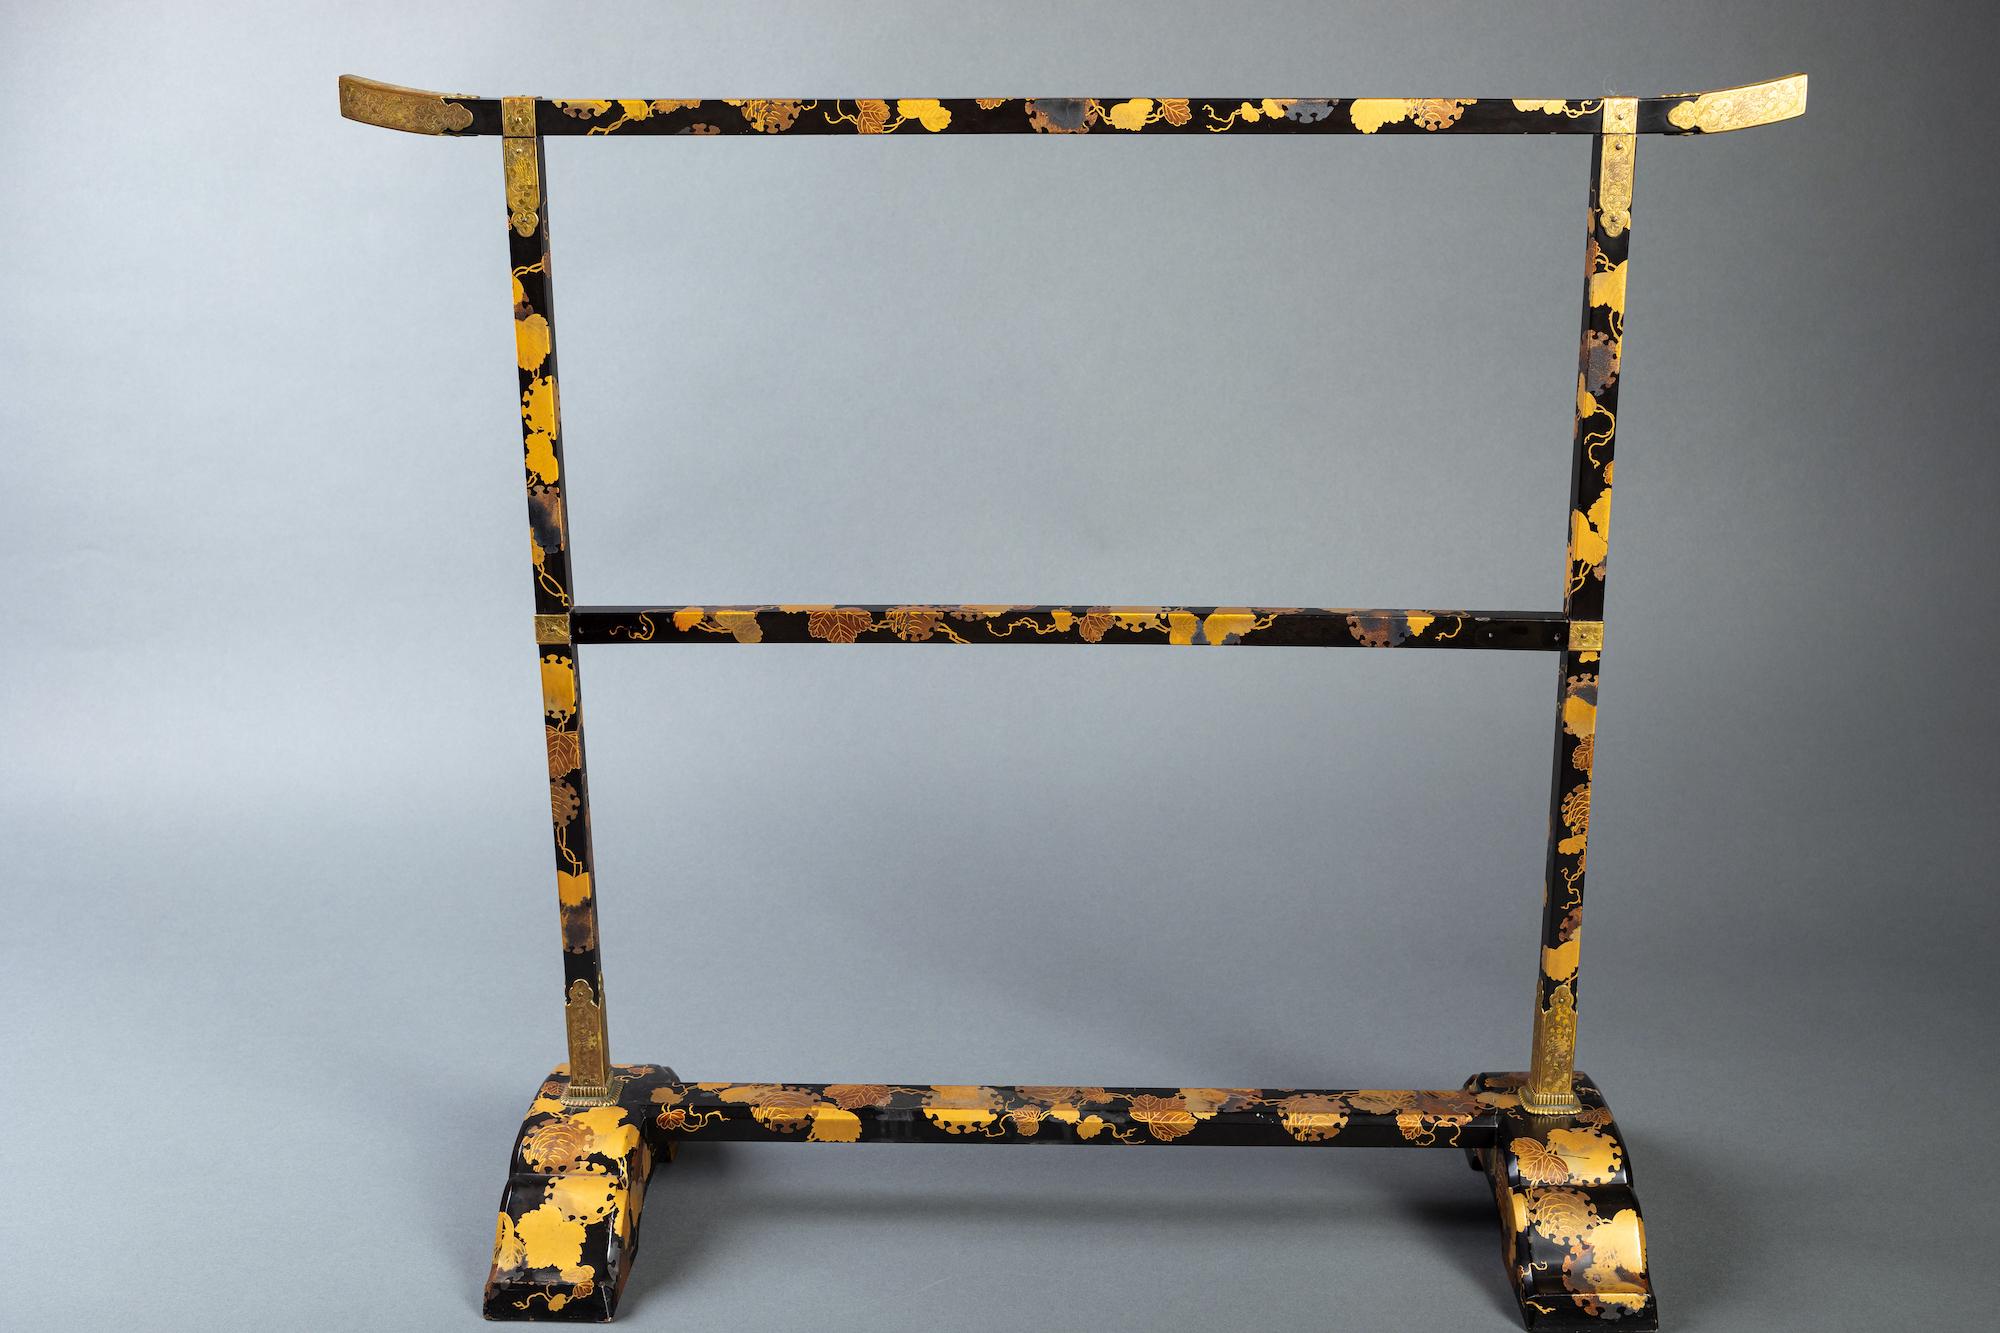 Mid to late 19th century, originally produced as a towel rack for the tea ceremony in black and gold lacquer on wood, with beautifully decorated bronze mounts.  